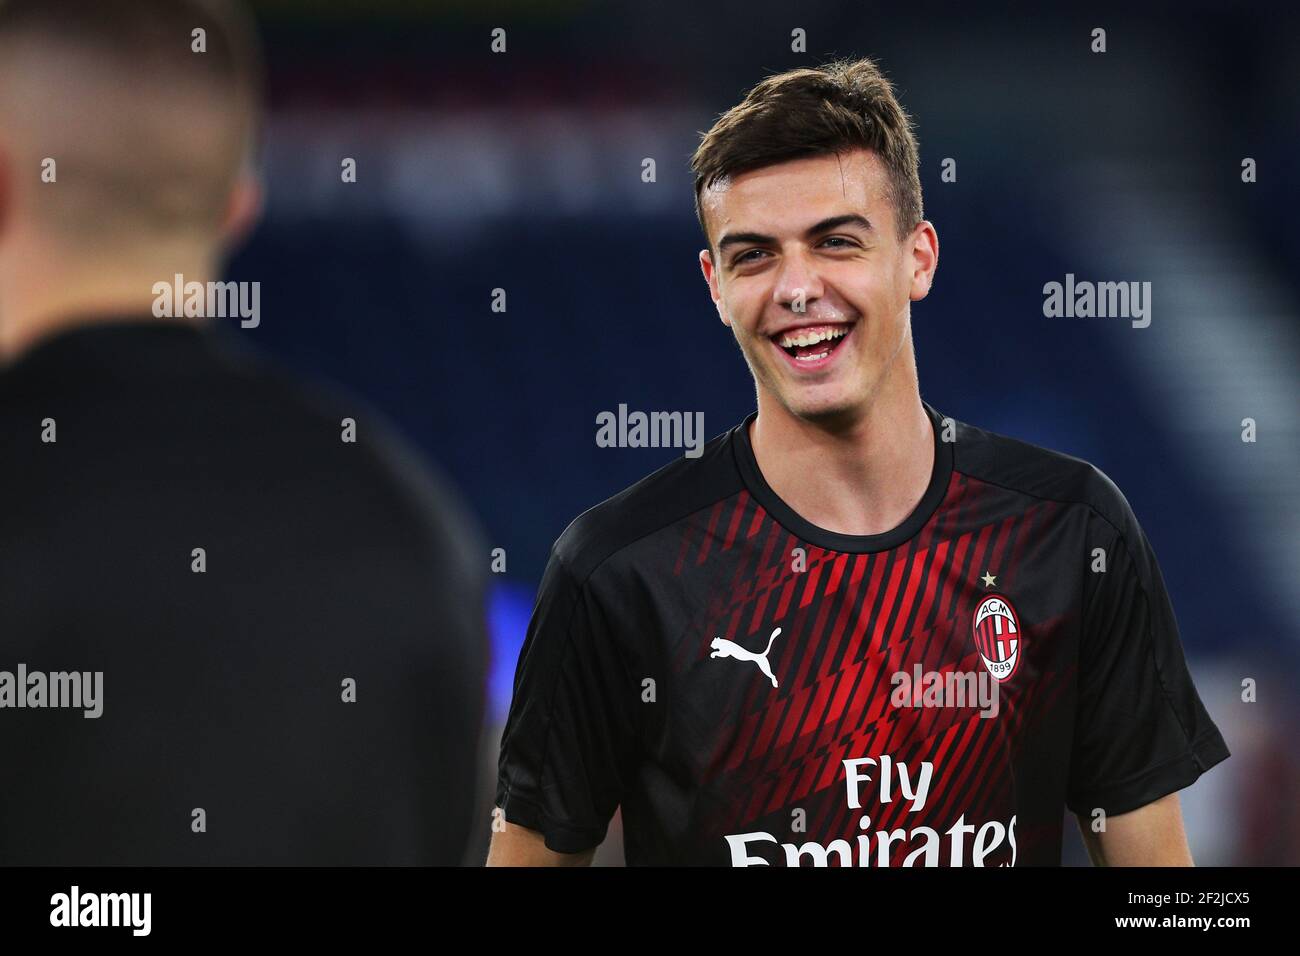 Daniel Maldini Of Milan During Warm Up Before The Italian Championship Serie A Football Match Between Ss Lazio And Ac Milan On July 4 At Stadio Olimpico In Rome Italy